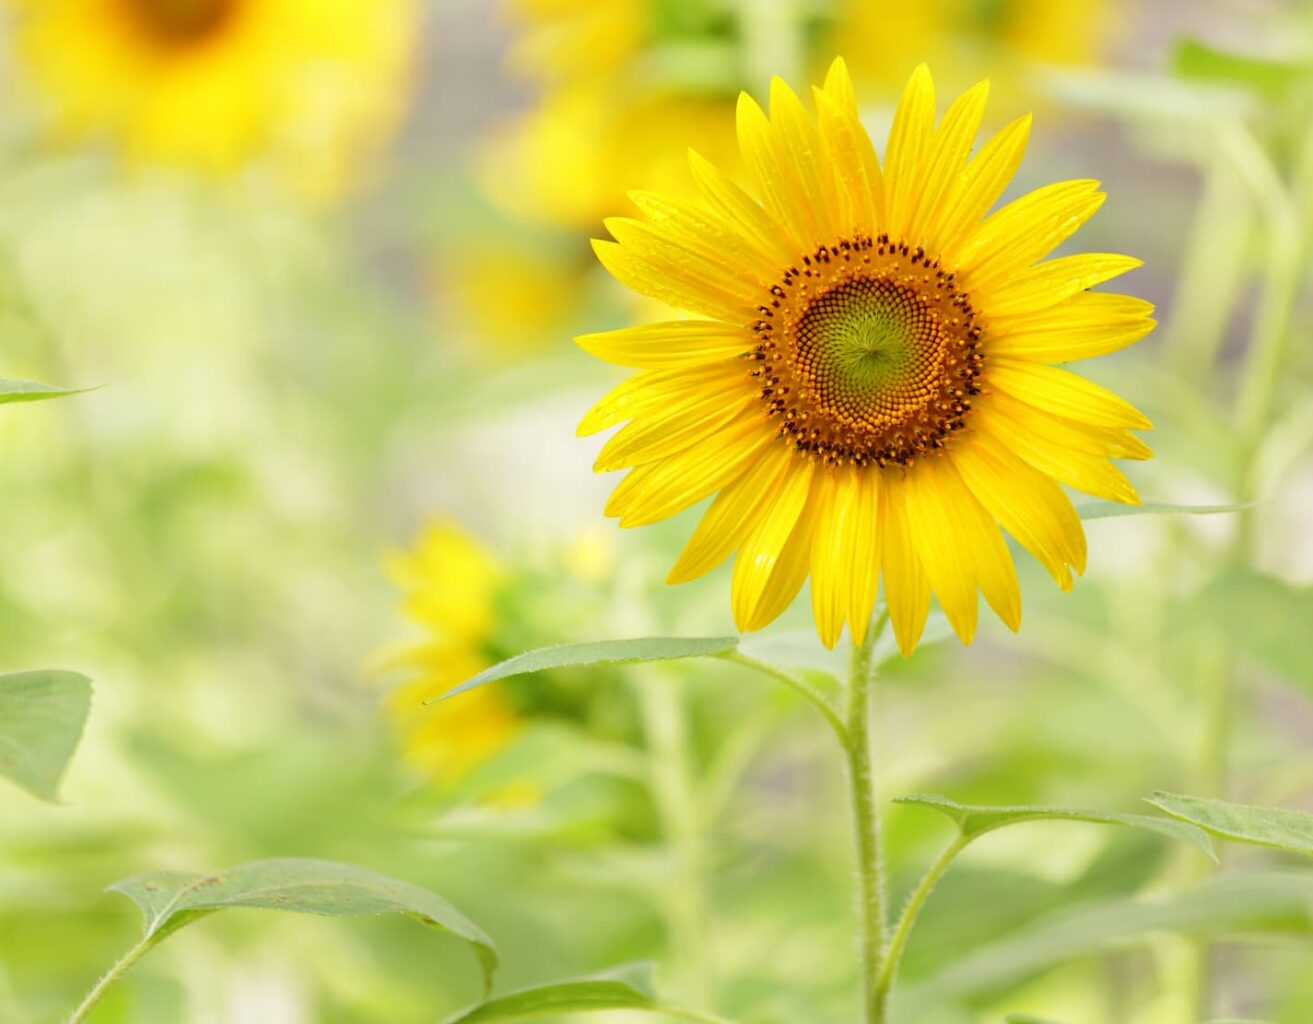 An image of a sunflower in a field.